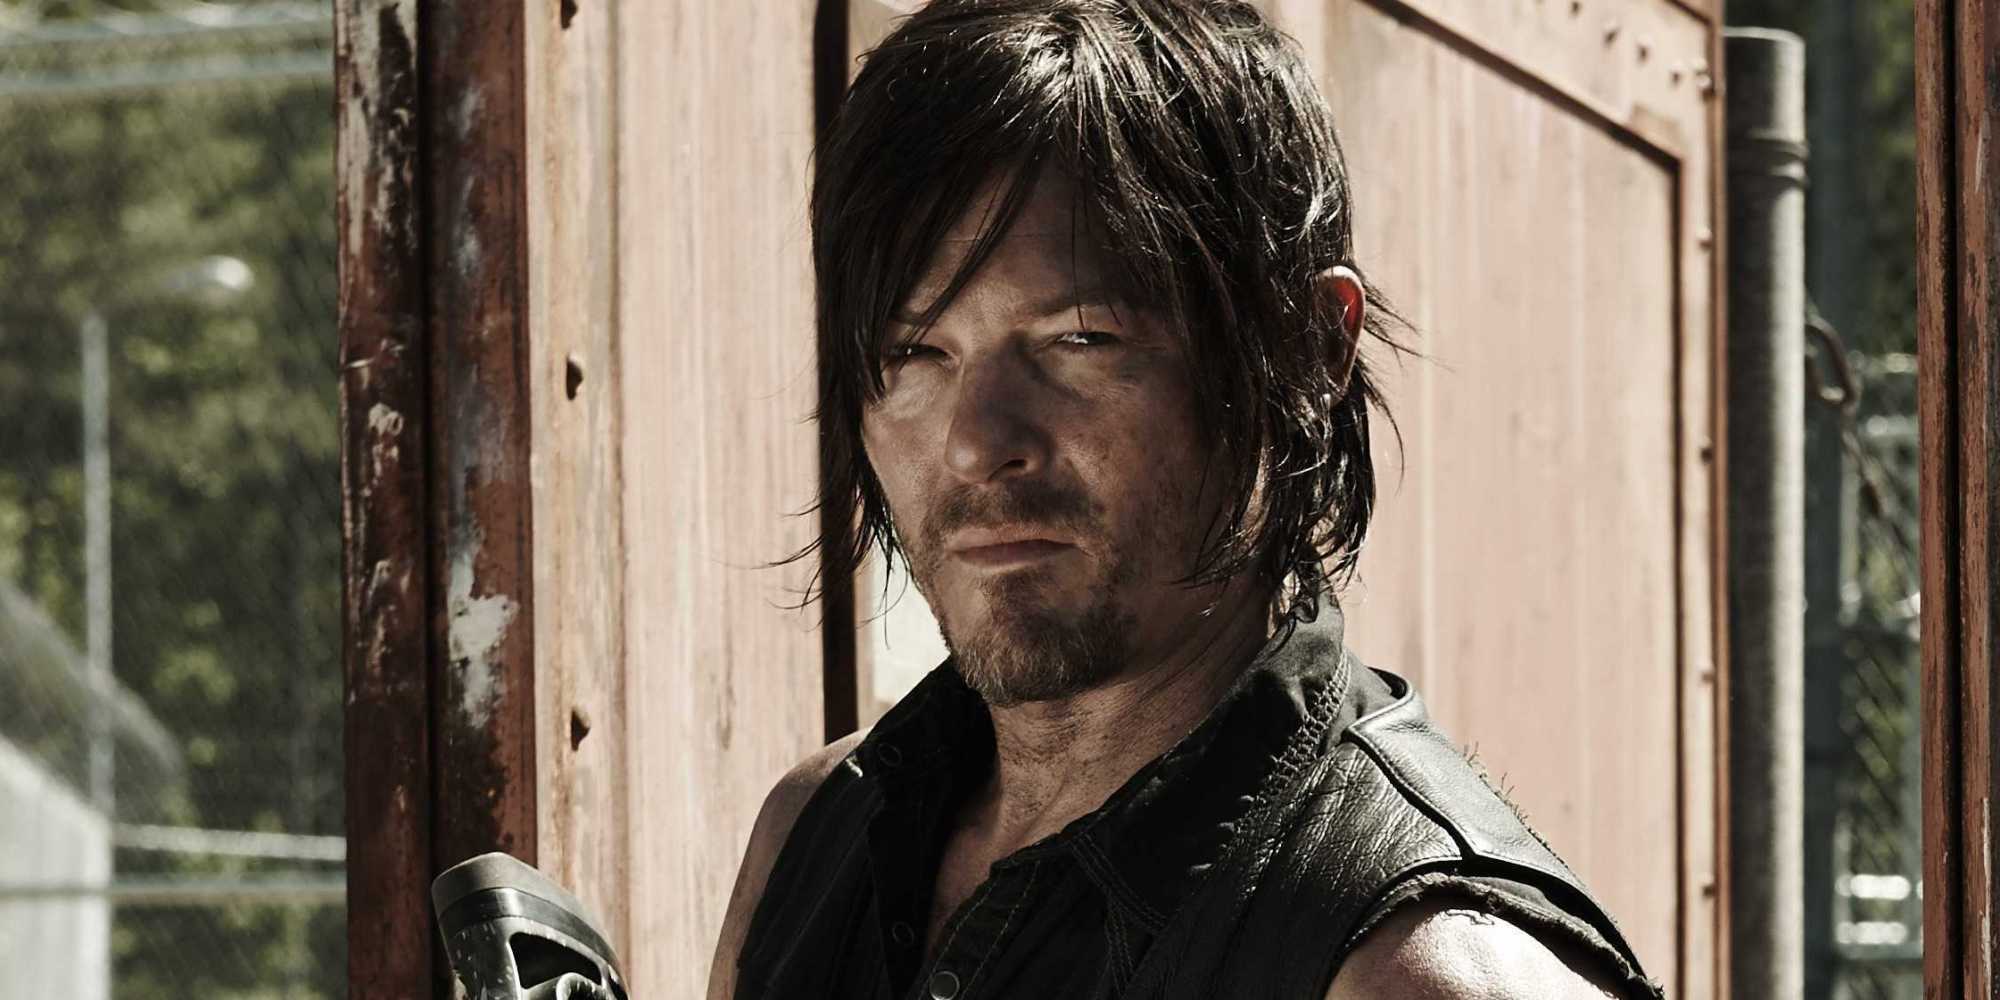 From Walking Dead To Silent Hills 9 Things We Learned From Norman Reedus Reddit Ama